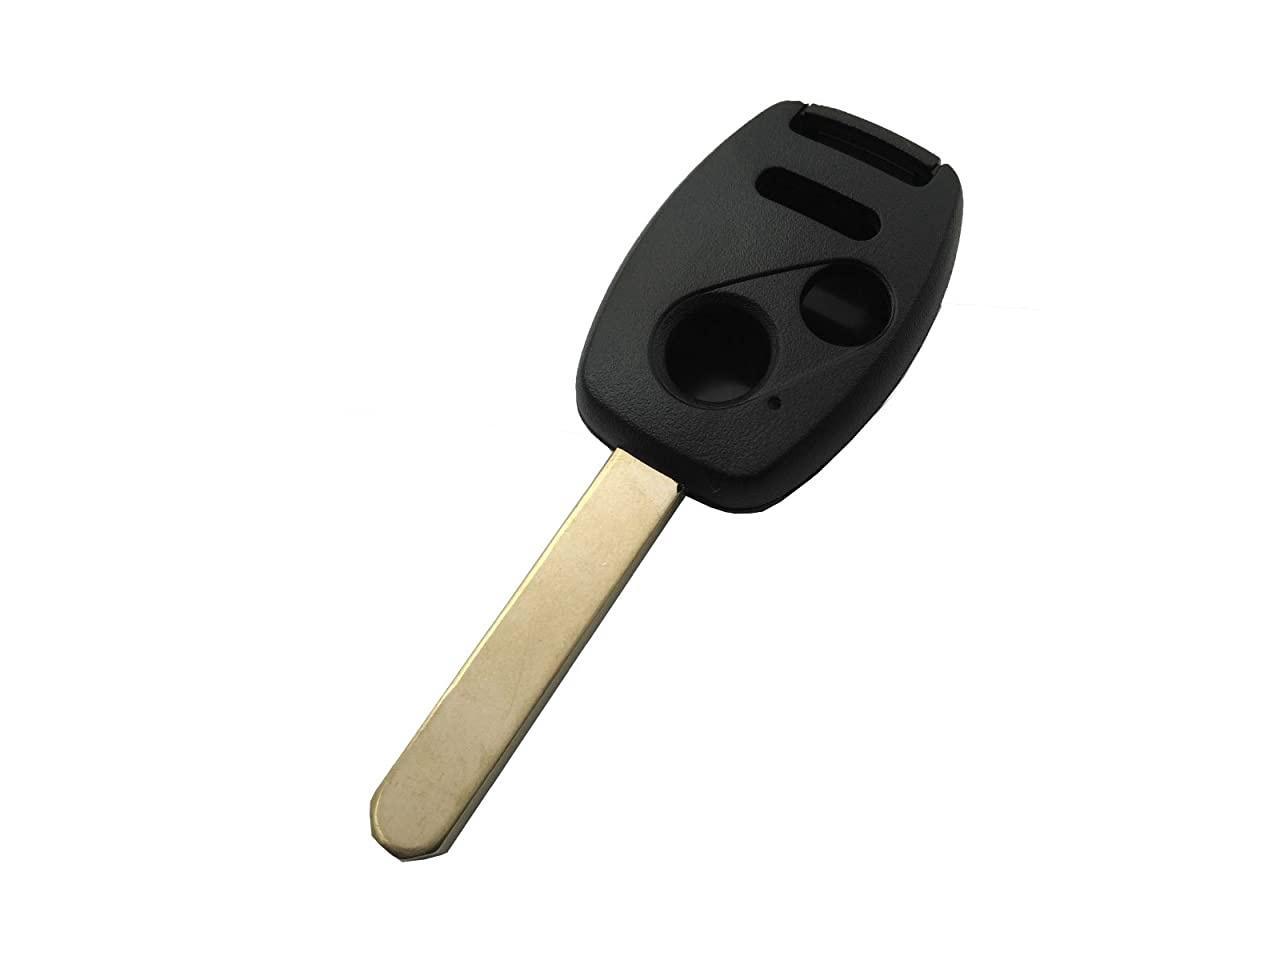 NO Need To Cut Your Old Key and Use Fob Chip Horande Replacement Key Fob Case Shell Fit For Honda Accord Ridgeline Civic and CR-V Honda Pilot KR55WK49308 N5F-A05TAA N5F-S0084A Key Cover 